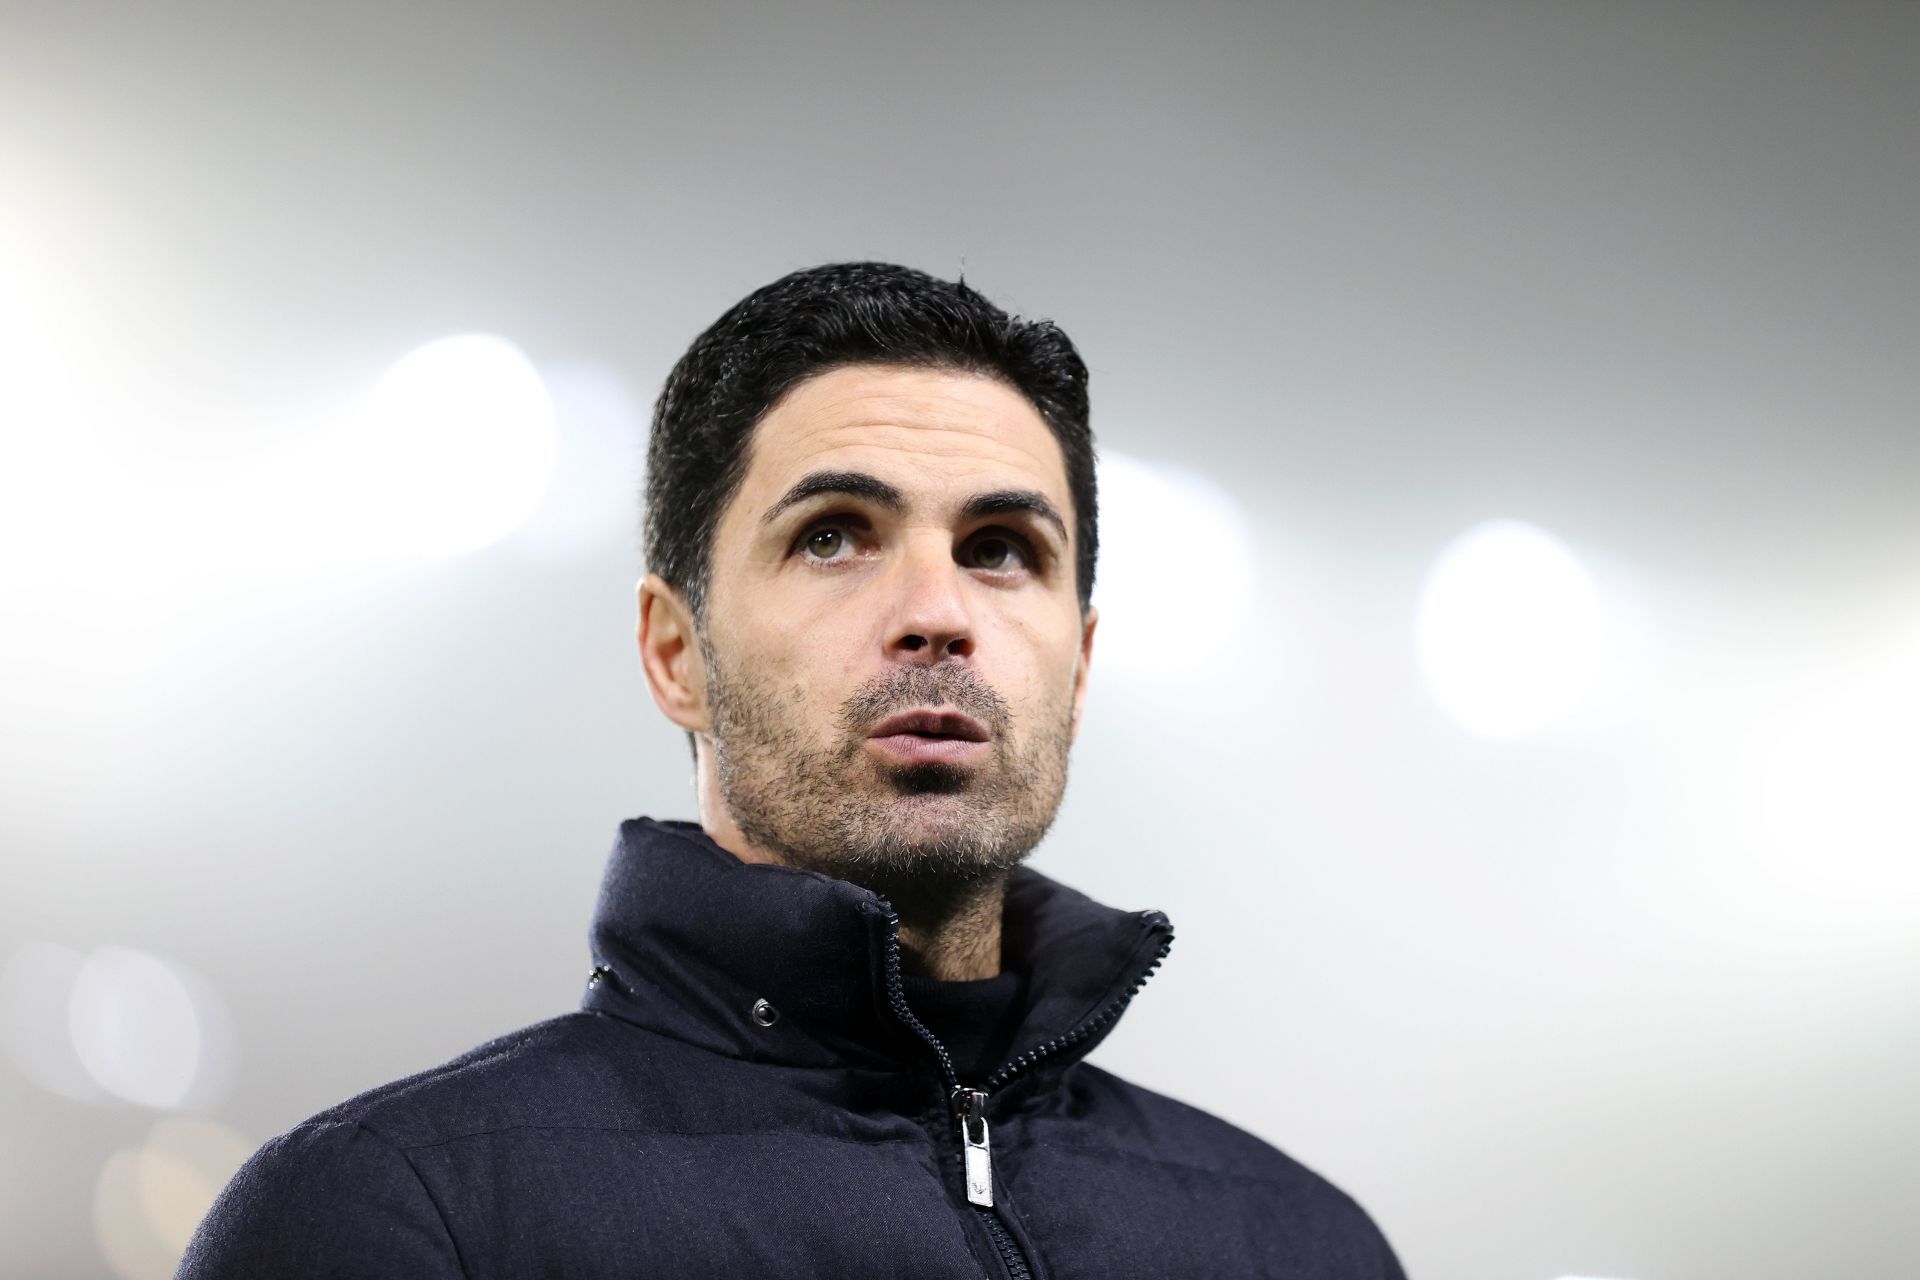 Arsenal manager Mikel Arteta is aiming for a top-four finish.